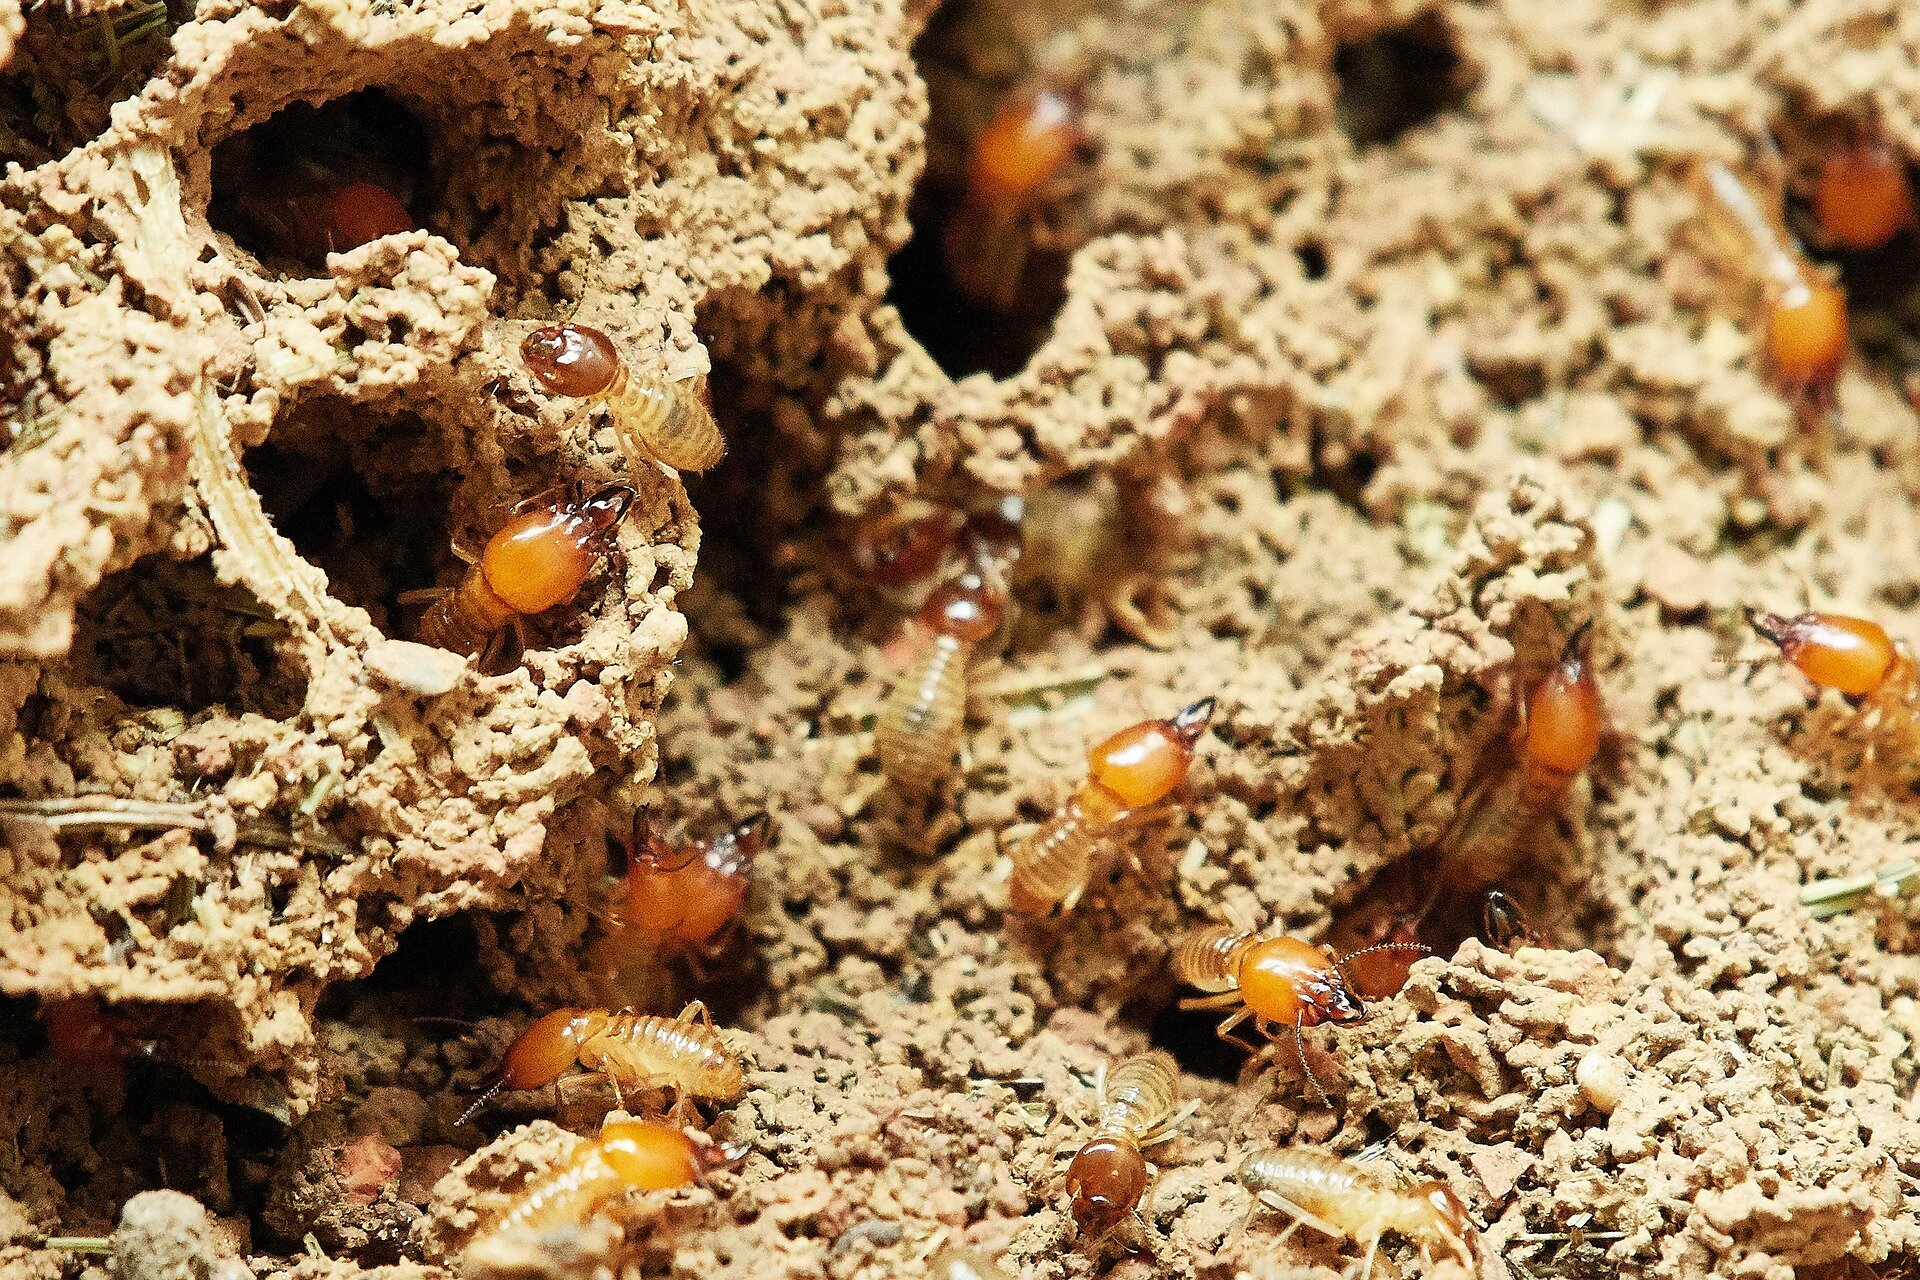 photo of Invasive termites dining in our homes will soon be a reality in most cities, says research image